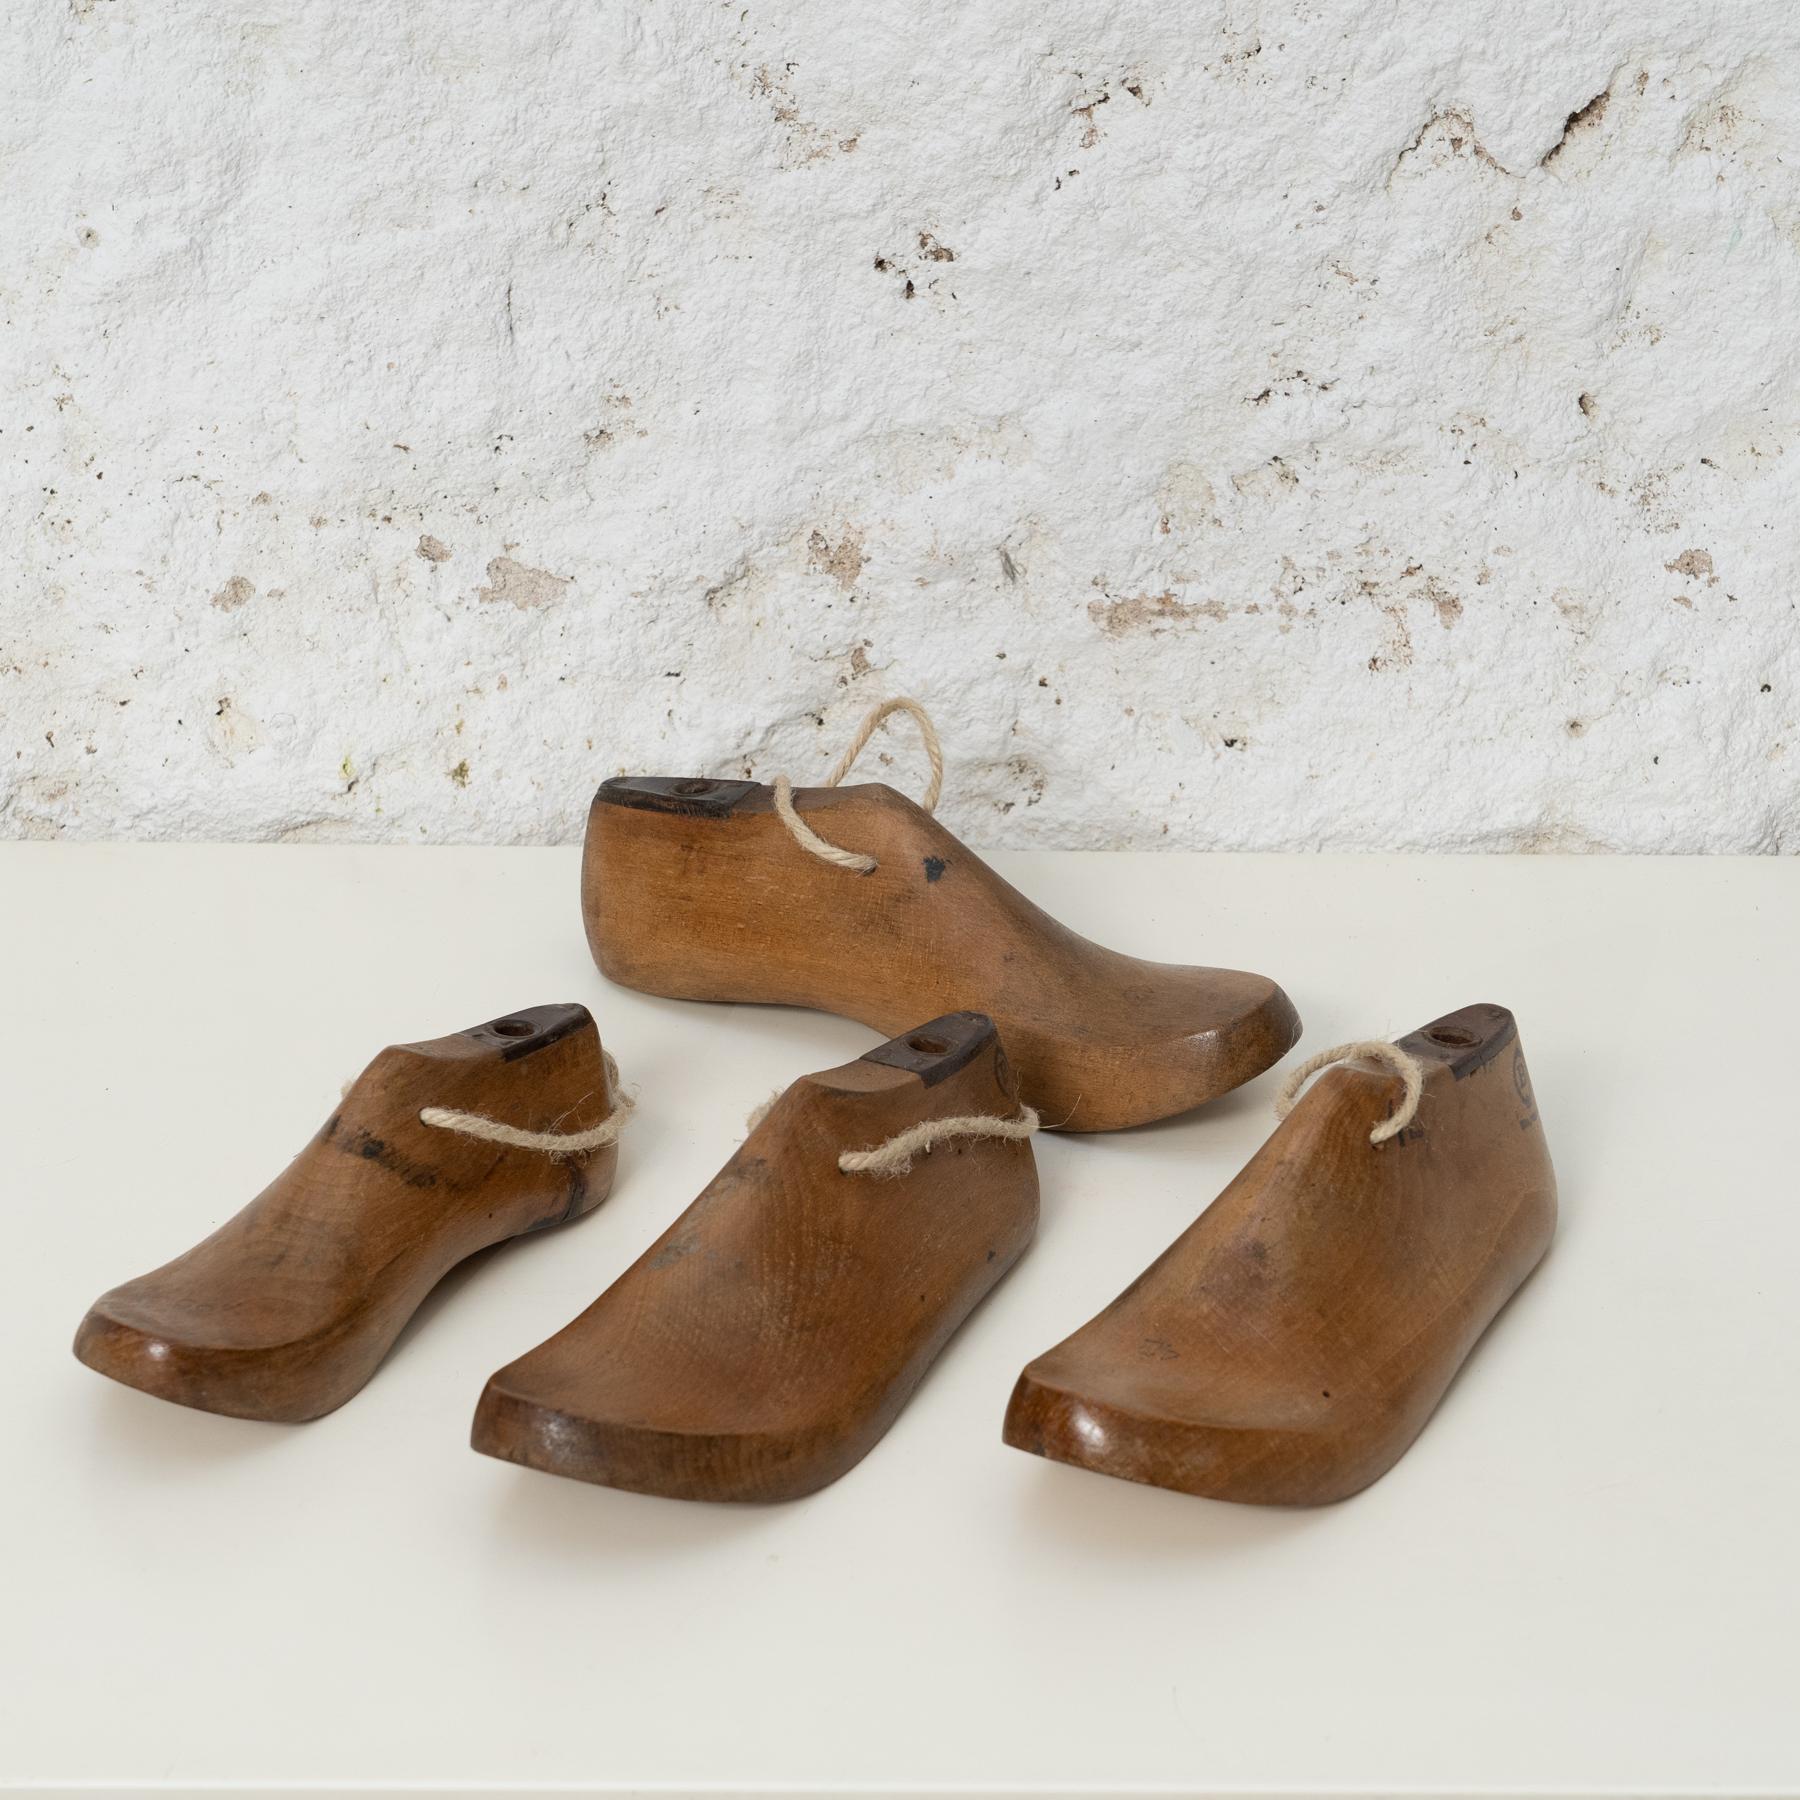     Era: circa 1940
    Material: Solid Wood

Original Condition  Vintage Charm  Timeless Craftsmanship

Discover the allure of authentic craftsmanship with this set of four solid wood shoe lasts dating back to circa 1940. Each piece tells a story